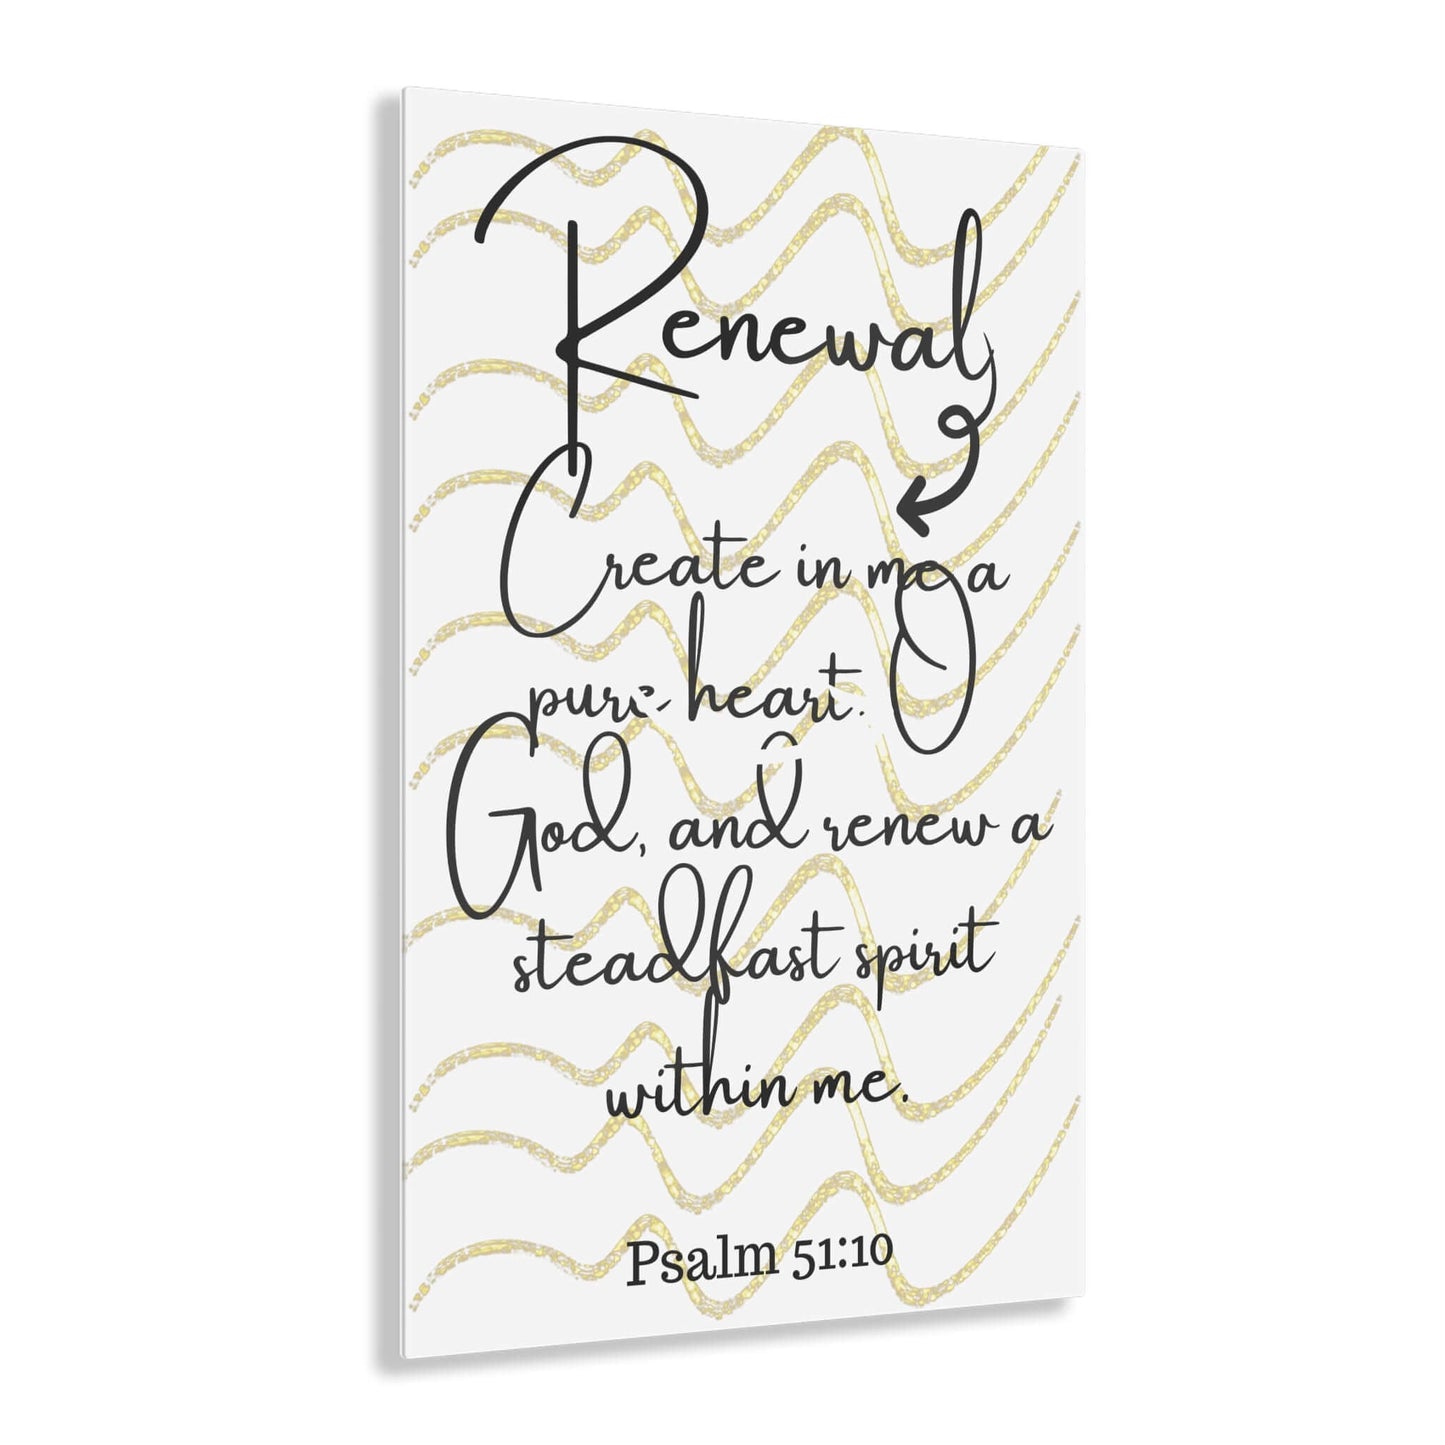 Paintings for Living Room - Acrylic Wall Art with Inspirational Scripture | Art & Wall Decor,Assembled in the USA,Assembled in USA,Decor,Home & Living,Home Decor,Indoor,Made in the USA,Made in USA,Poster